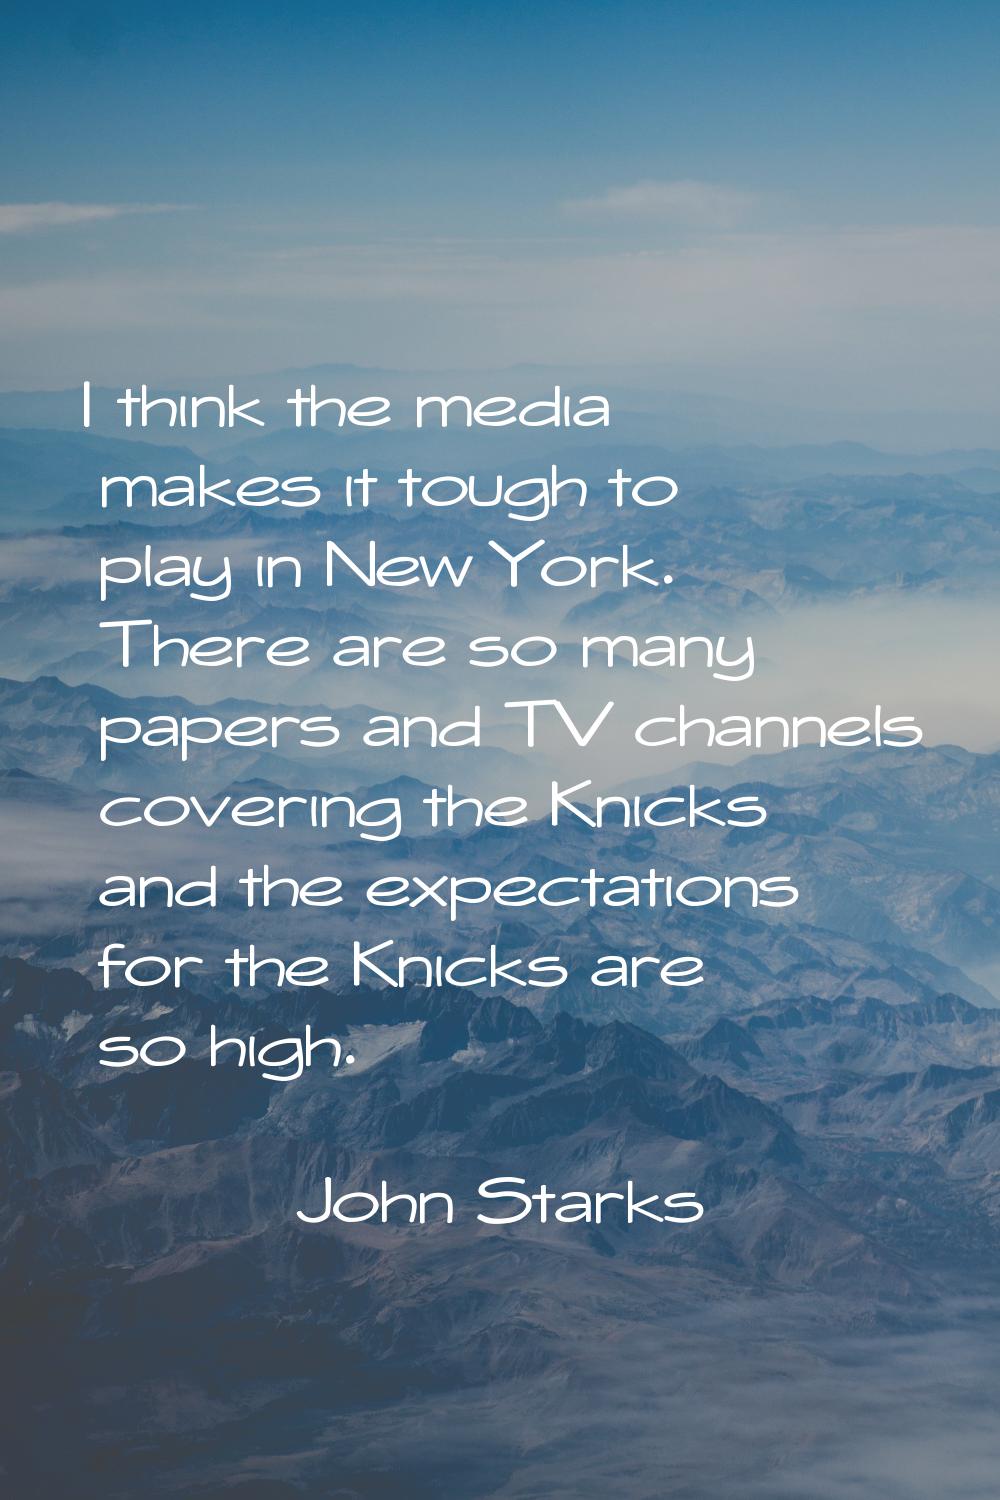 I think the media makes it tough to play in New York. There are so many papers and TV channels cove